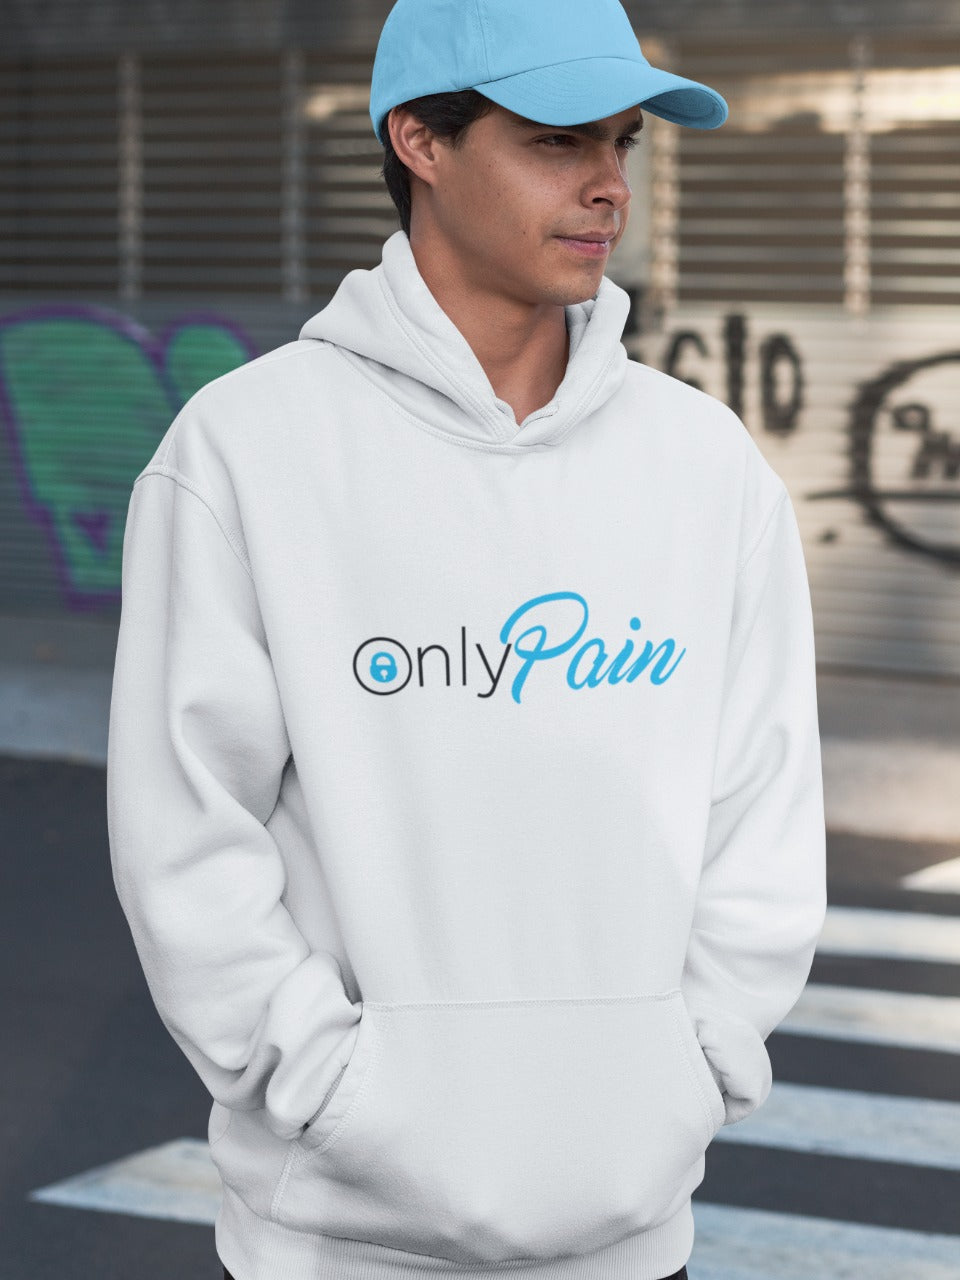 man wearing blue cap and white hoodie with only pain written on it like the onlyfans logo printed on it, relatable sarcastic memes